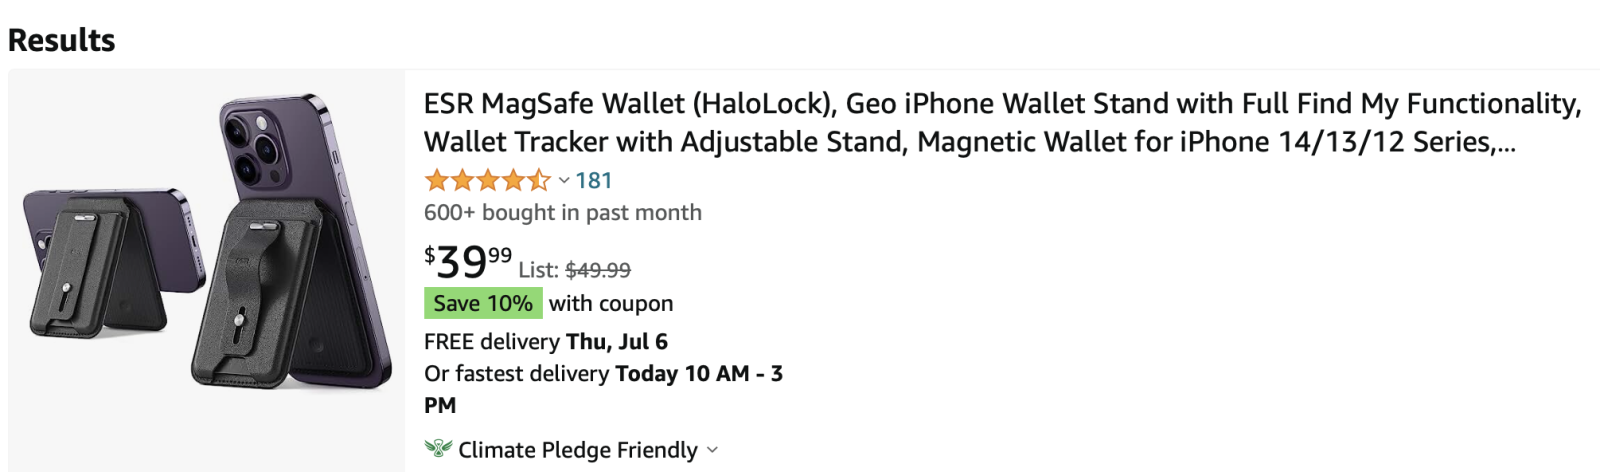 FS: Others - ESR MagSafe Wallet (HaloLock), Geo iPhone Wallet Stand with Full  Find My Functionality, Wallet Tracker with Adjustable Stand